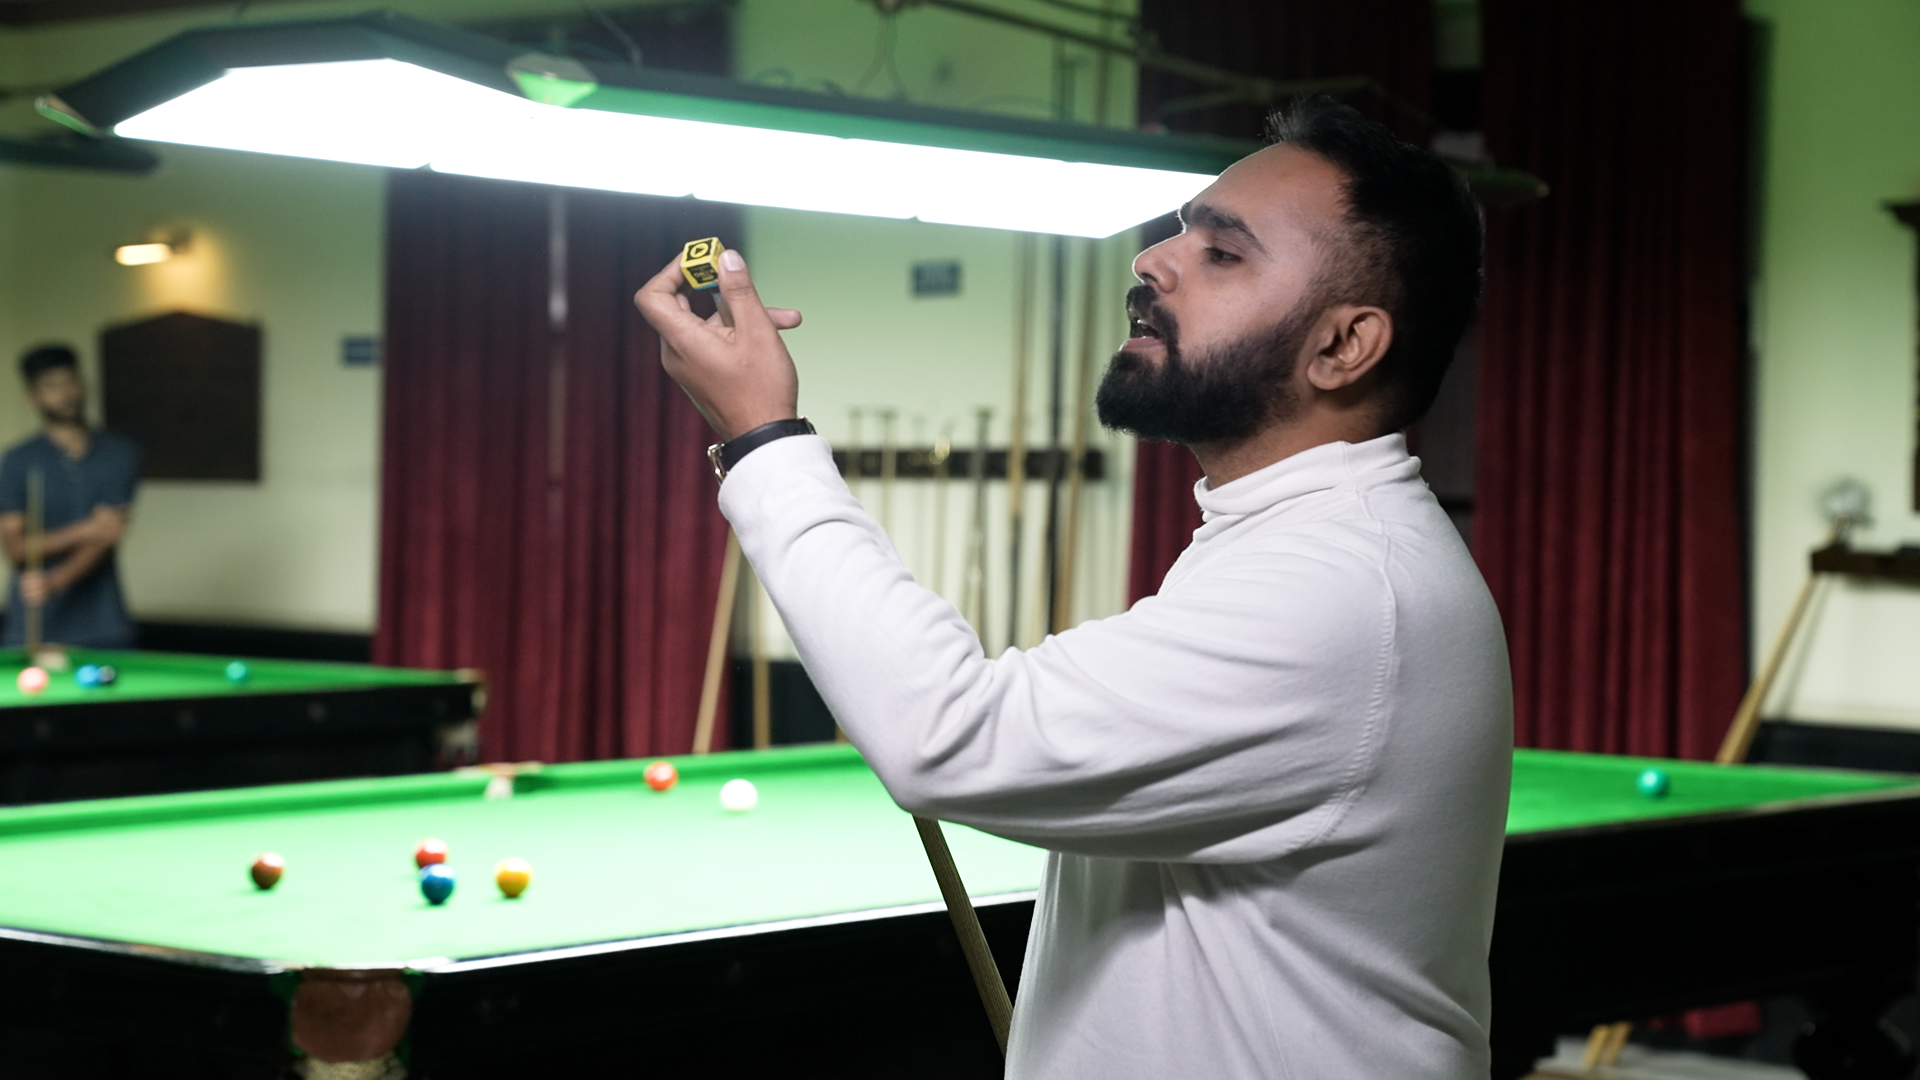 We Experienced Jabalpur’s Snooker Culture And Much More!